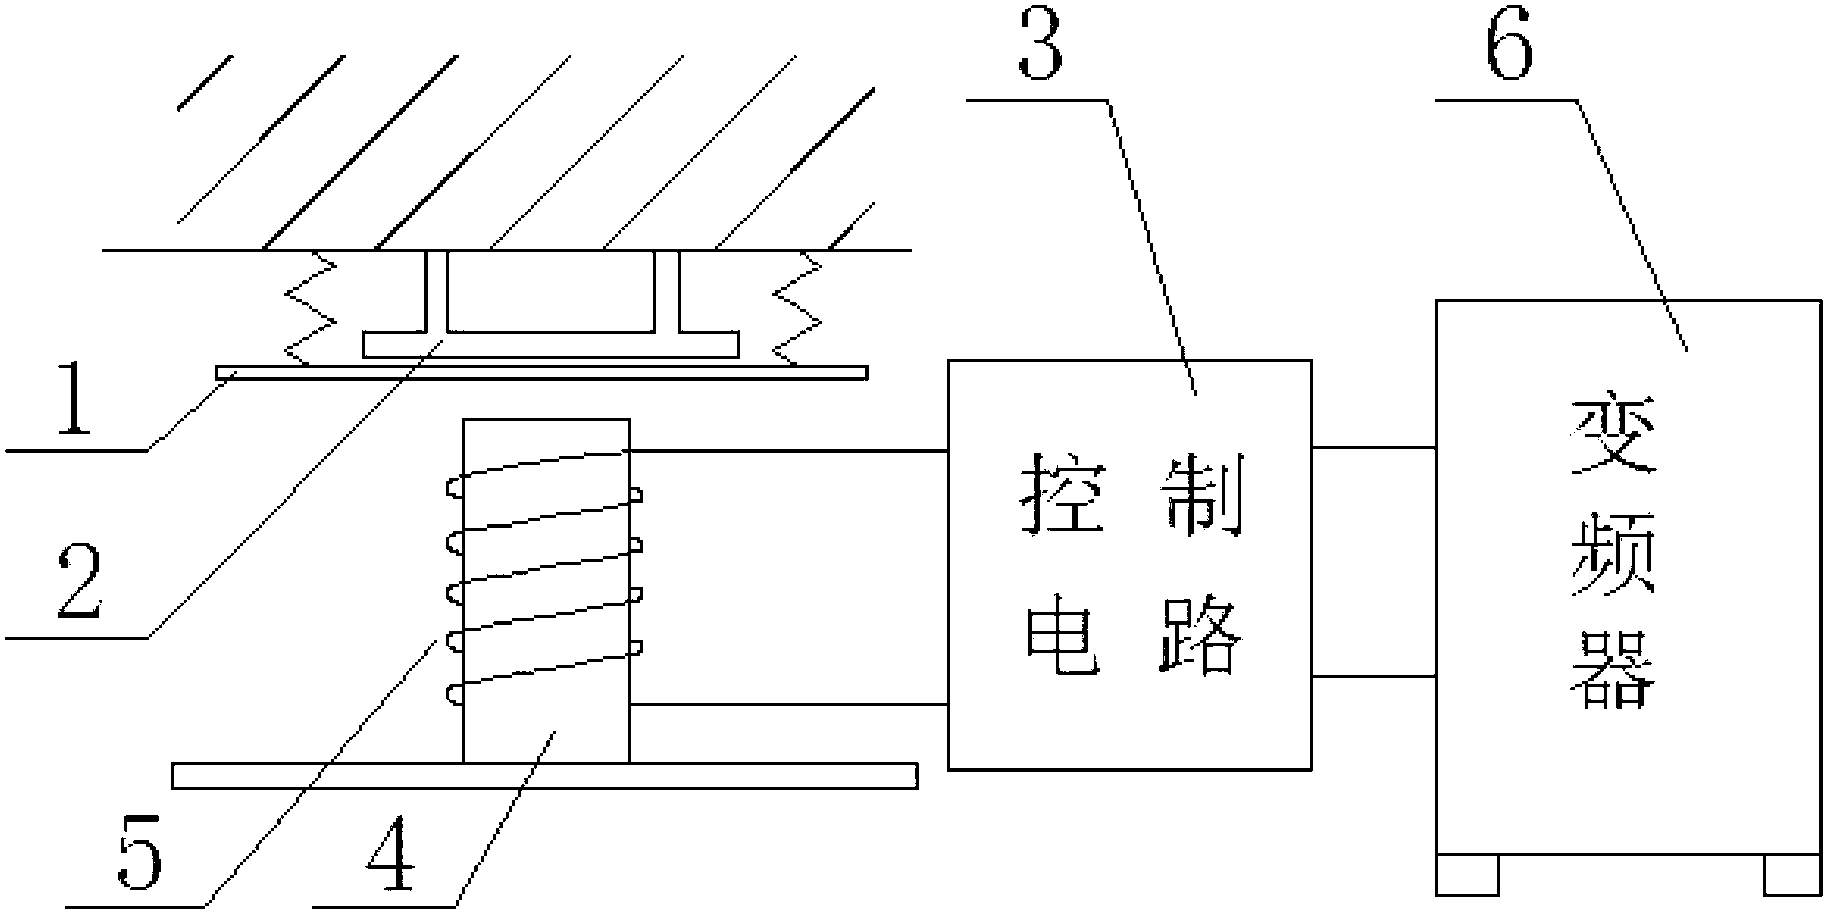 Electromagnetic relay used for dragon dance yarns